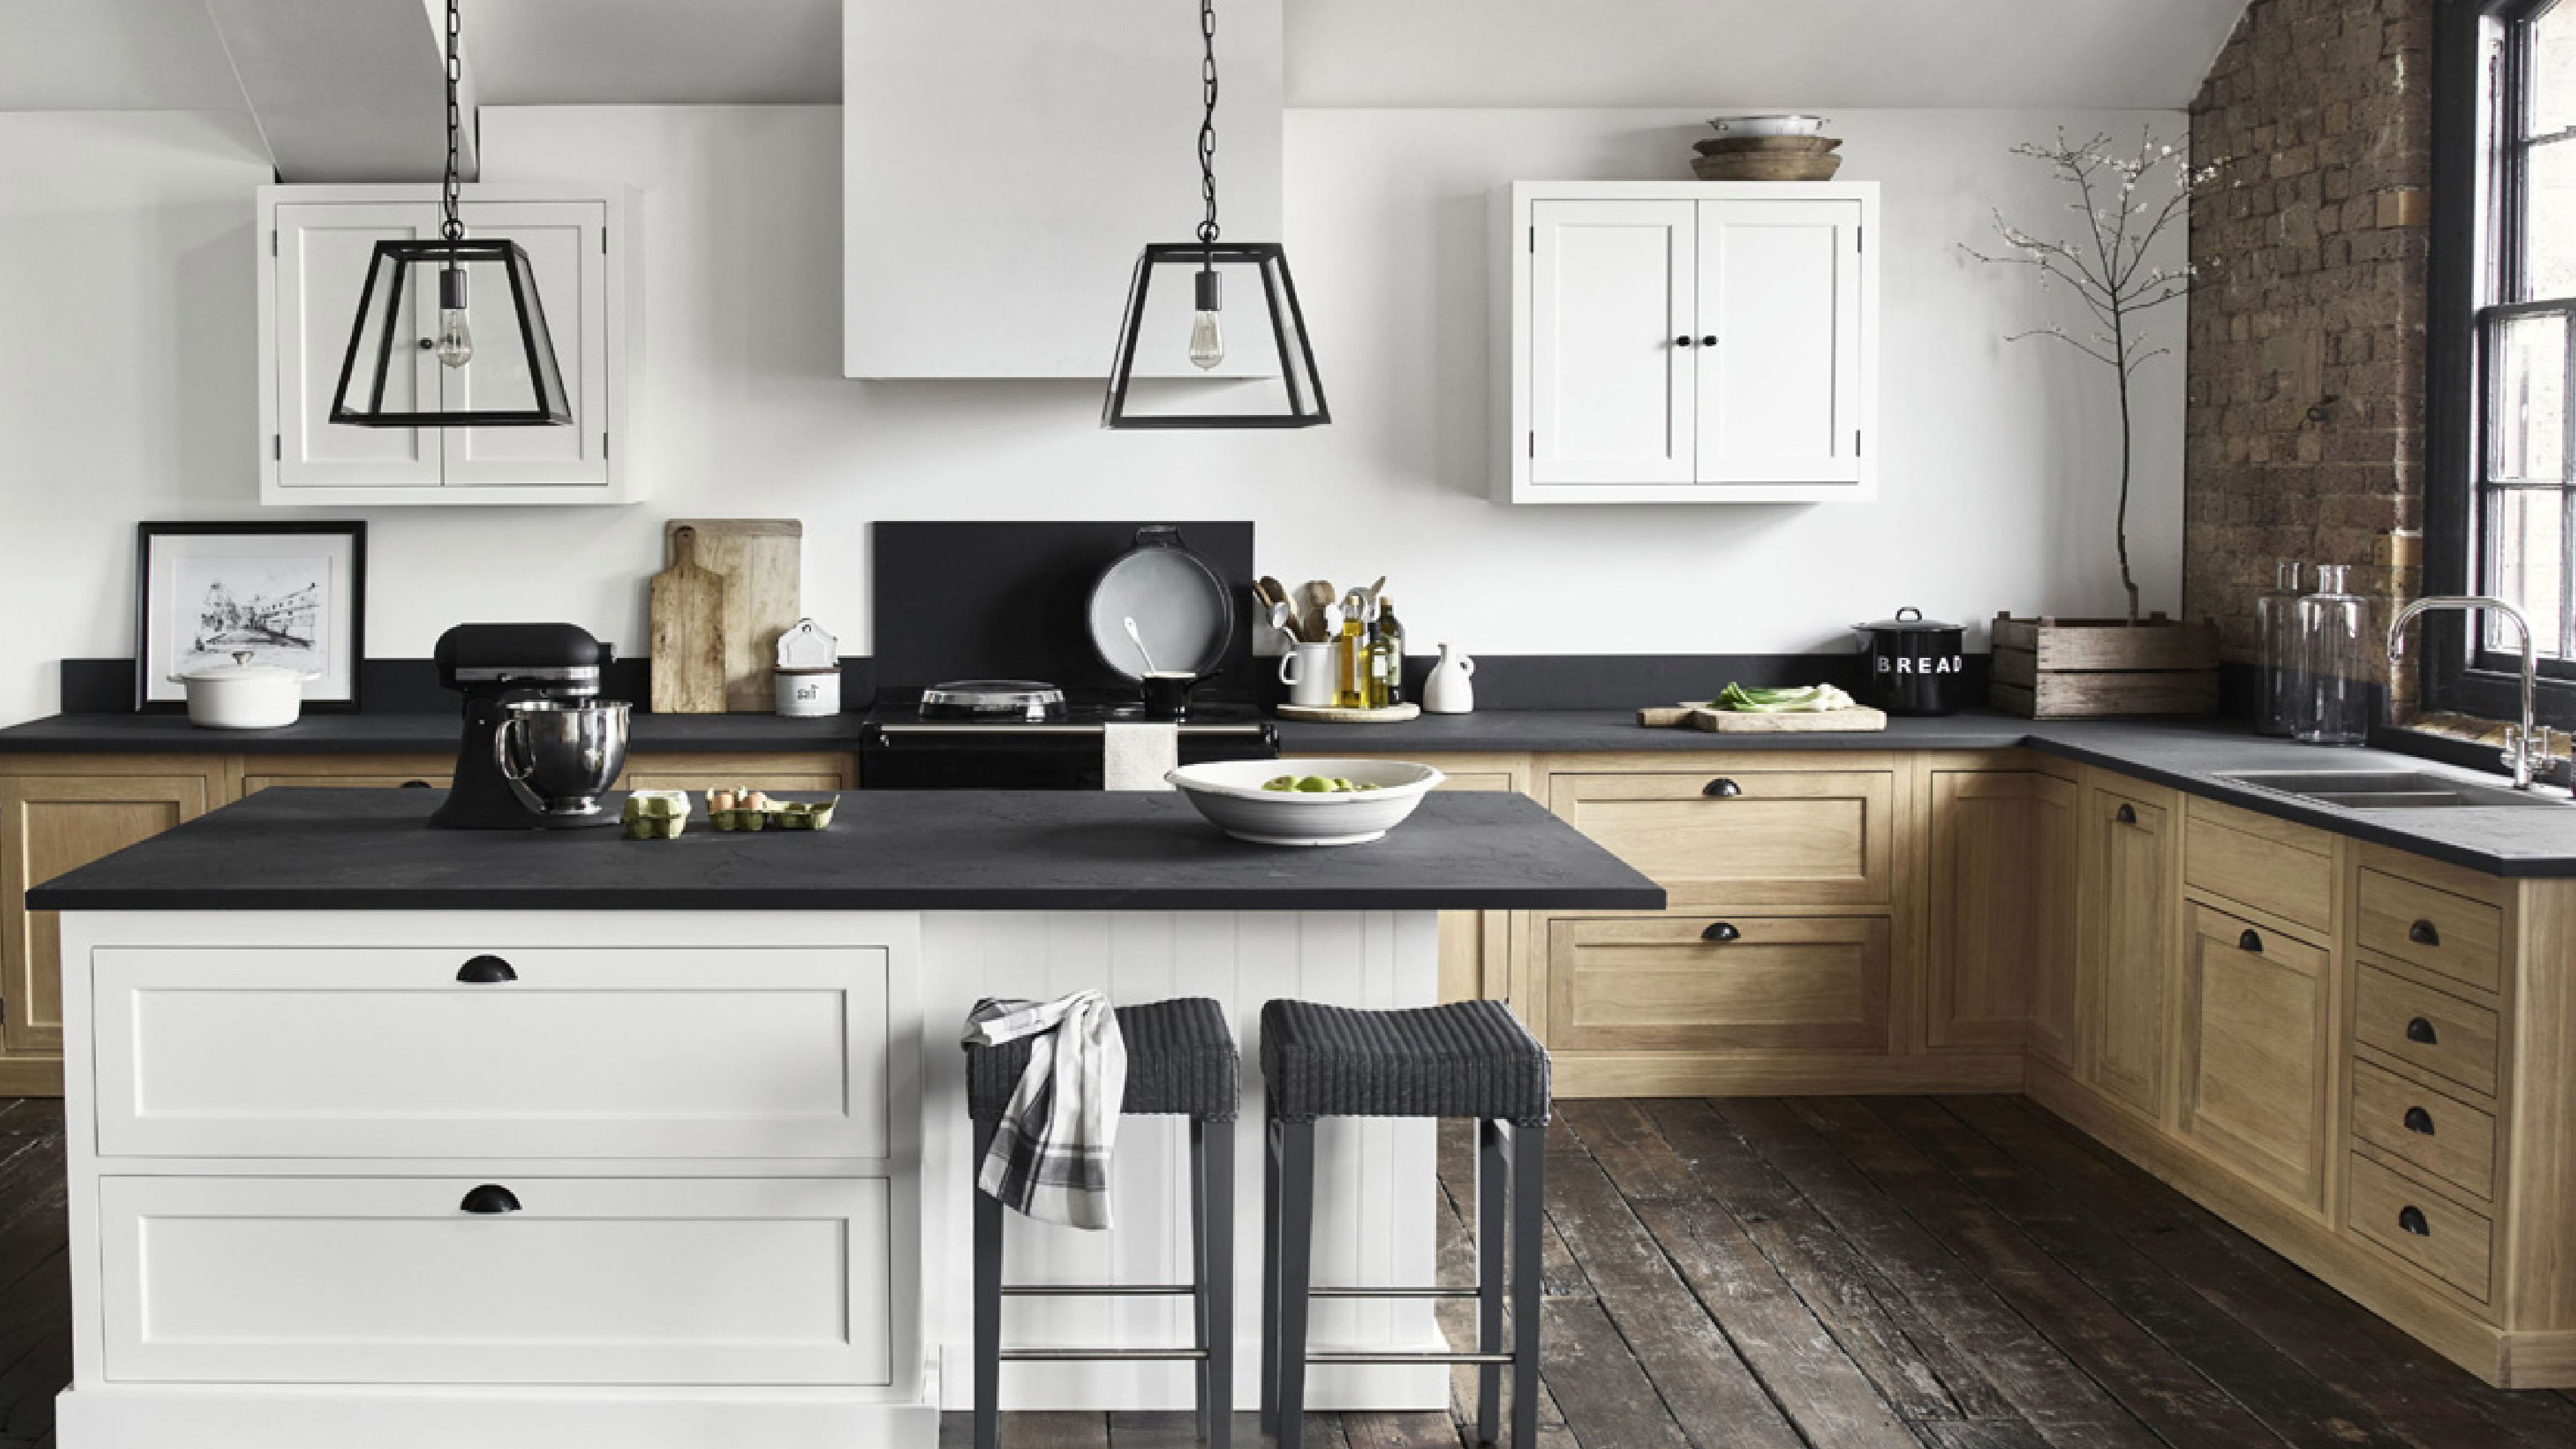 20 kitchen interior design tips from an expert – create your dream ...